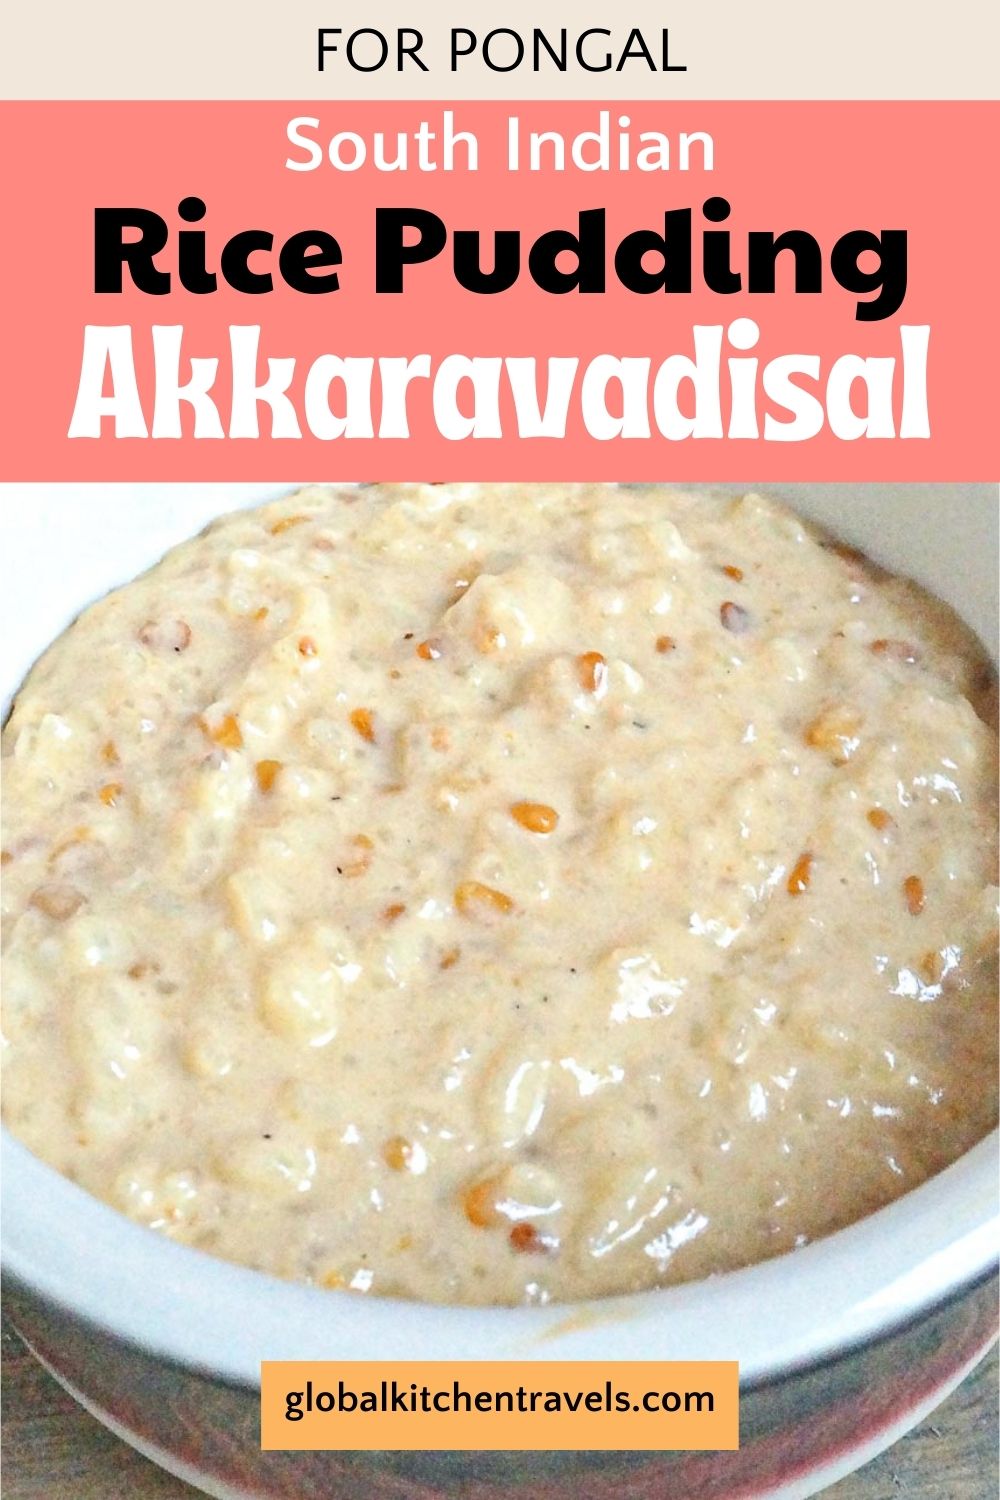 bowl of rice pudding with text